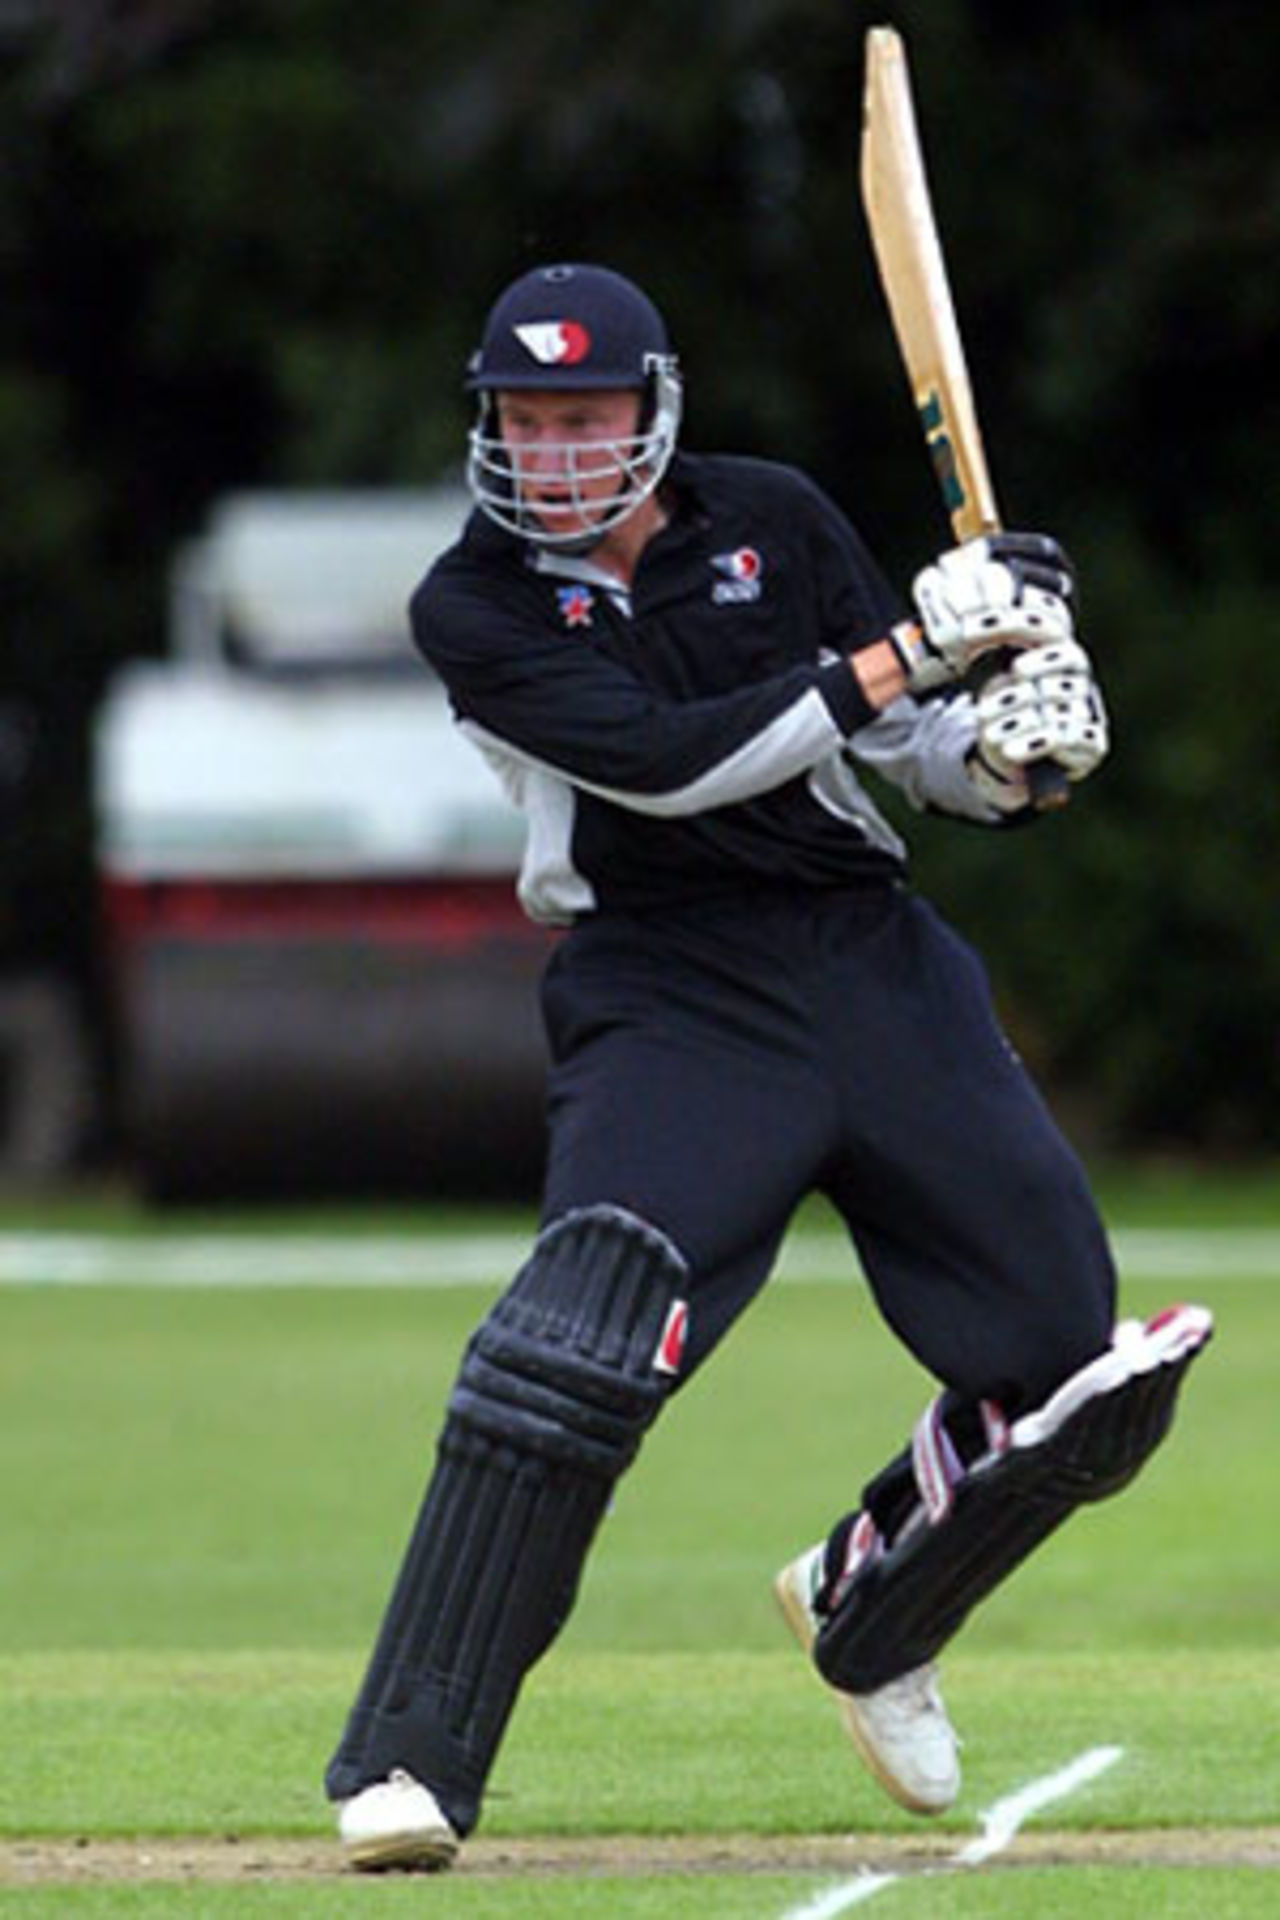 New Zealand Under-19 batsman Stephen Murdoch cuts a delivery during his innings of 44. ICC Under-19 World Cup Warmup: New Zealand Under-19s v Pakistan Under-19s at Lincoln No. 3, Lincoln, 17 January 2002.